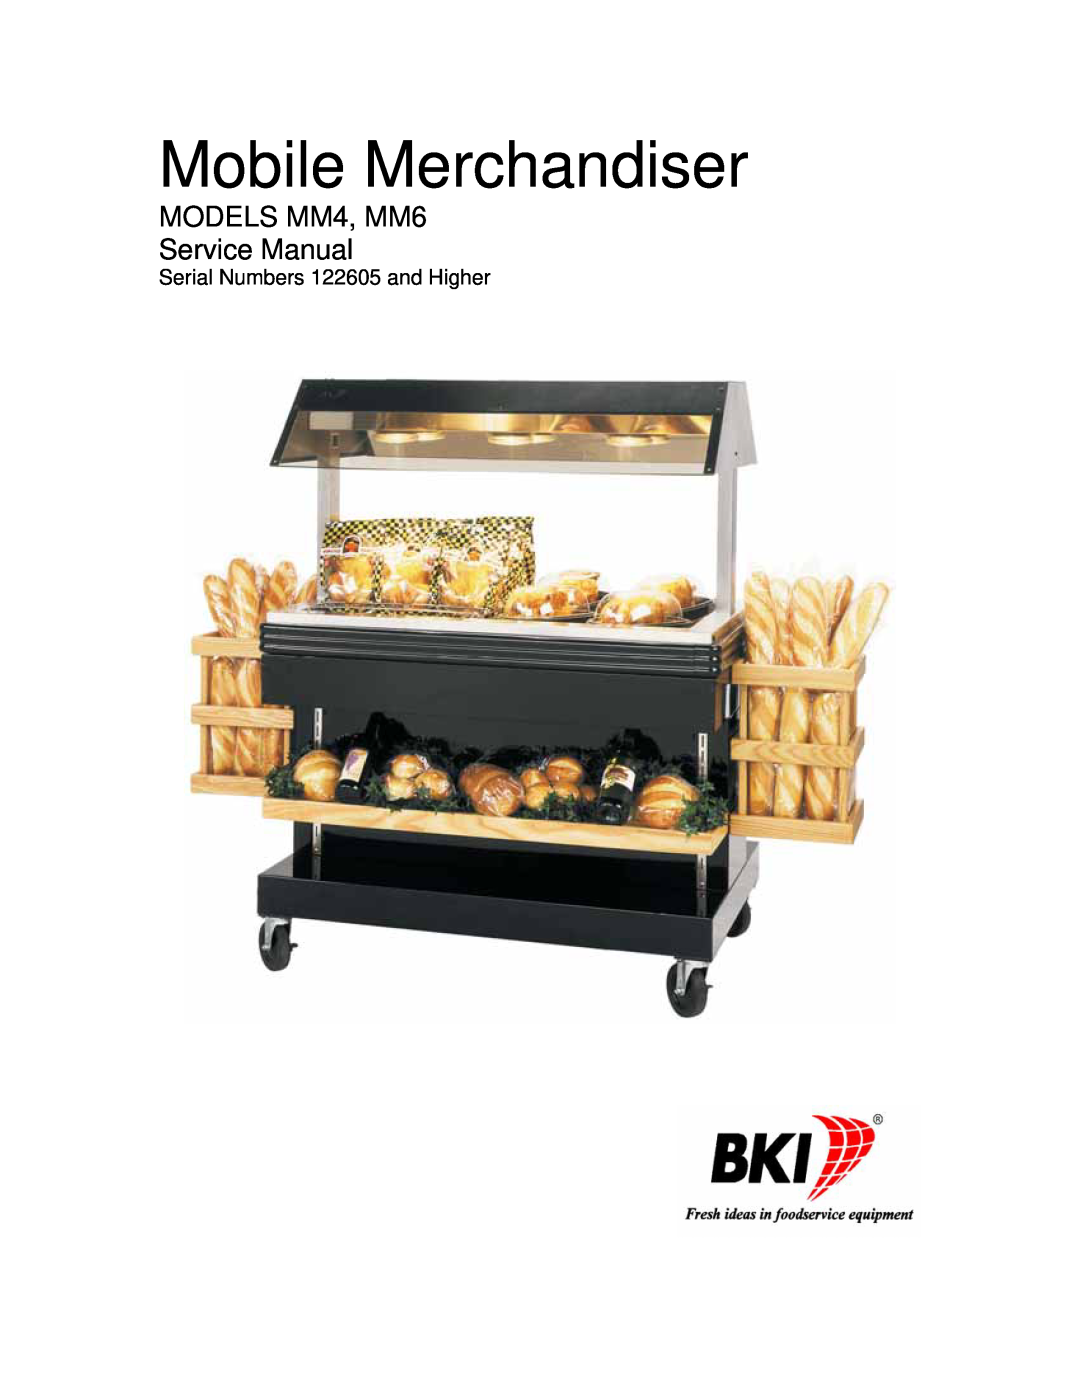 Bakers Pride Oven MM6, MM4 service manual Mobile Merchandiser, Serial Numbers 122605 and Higher 